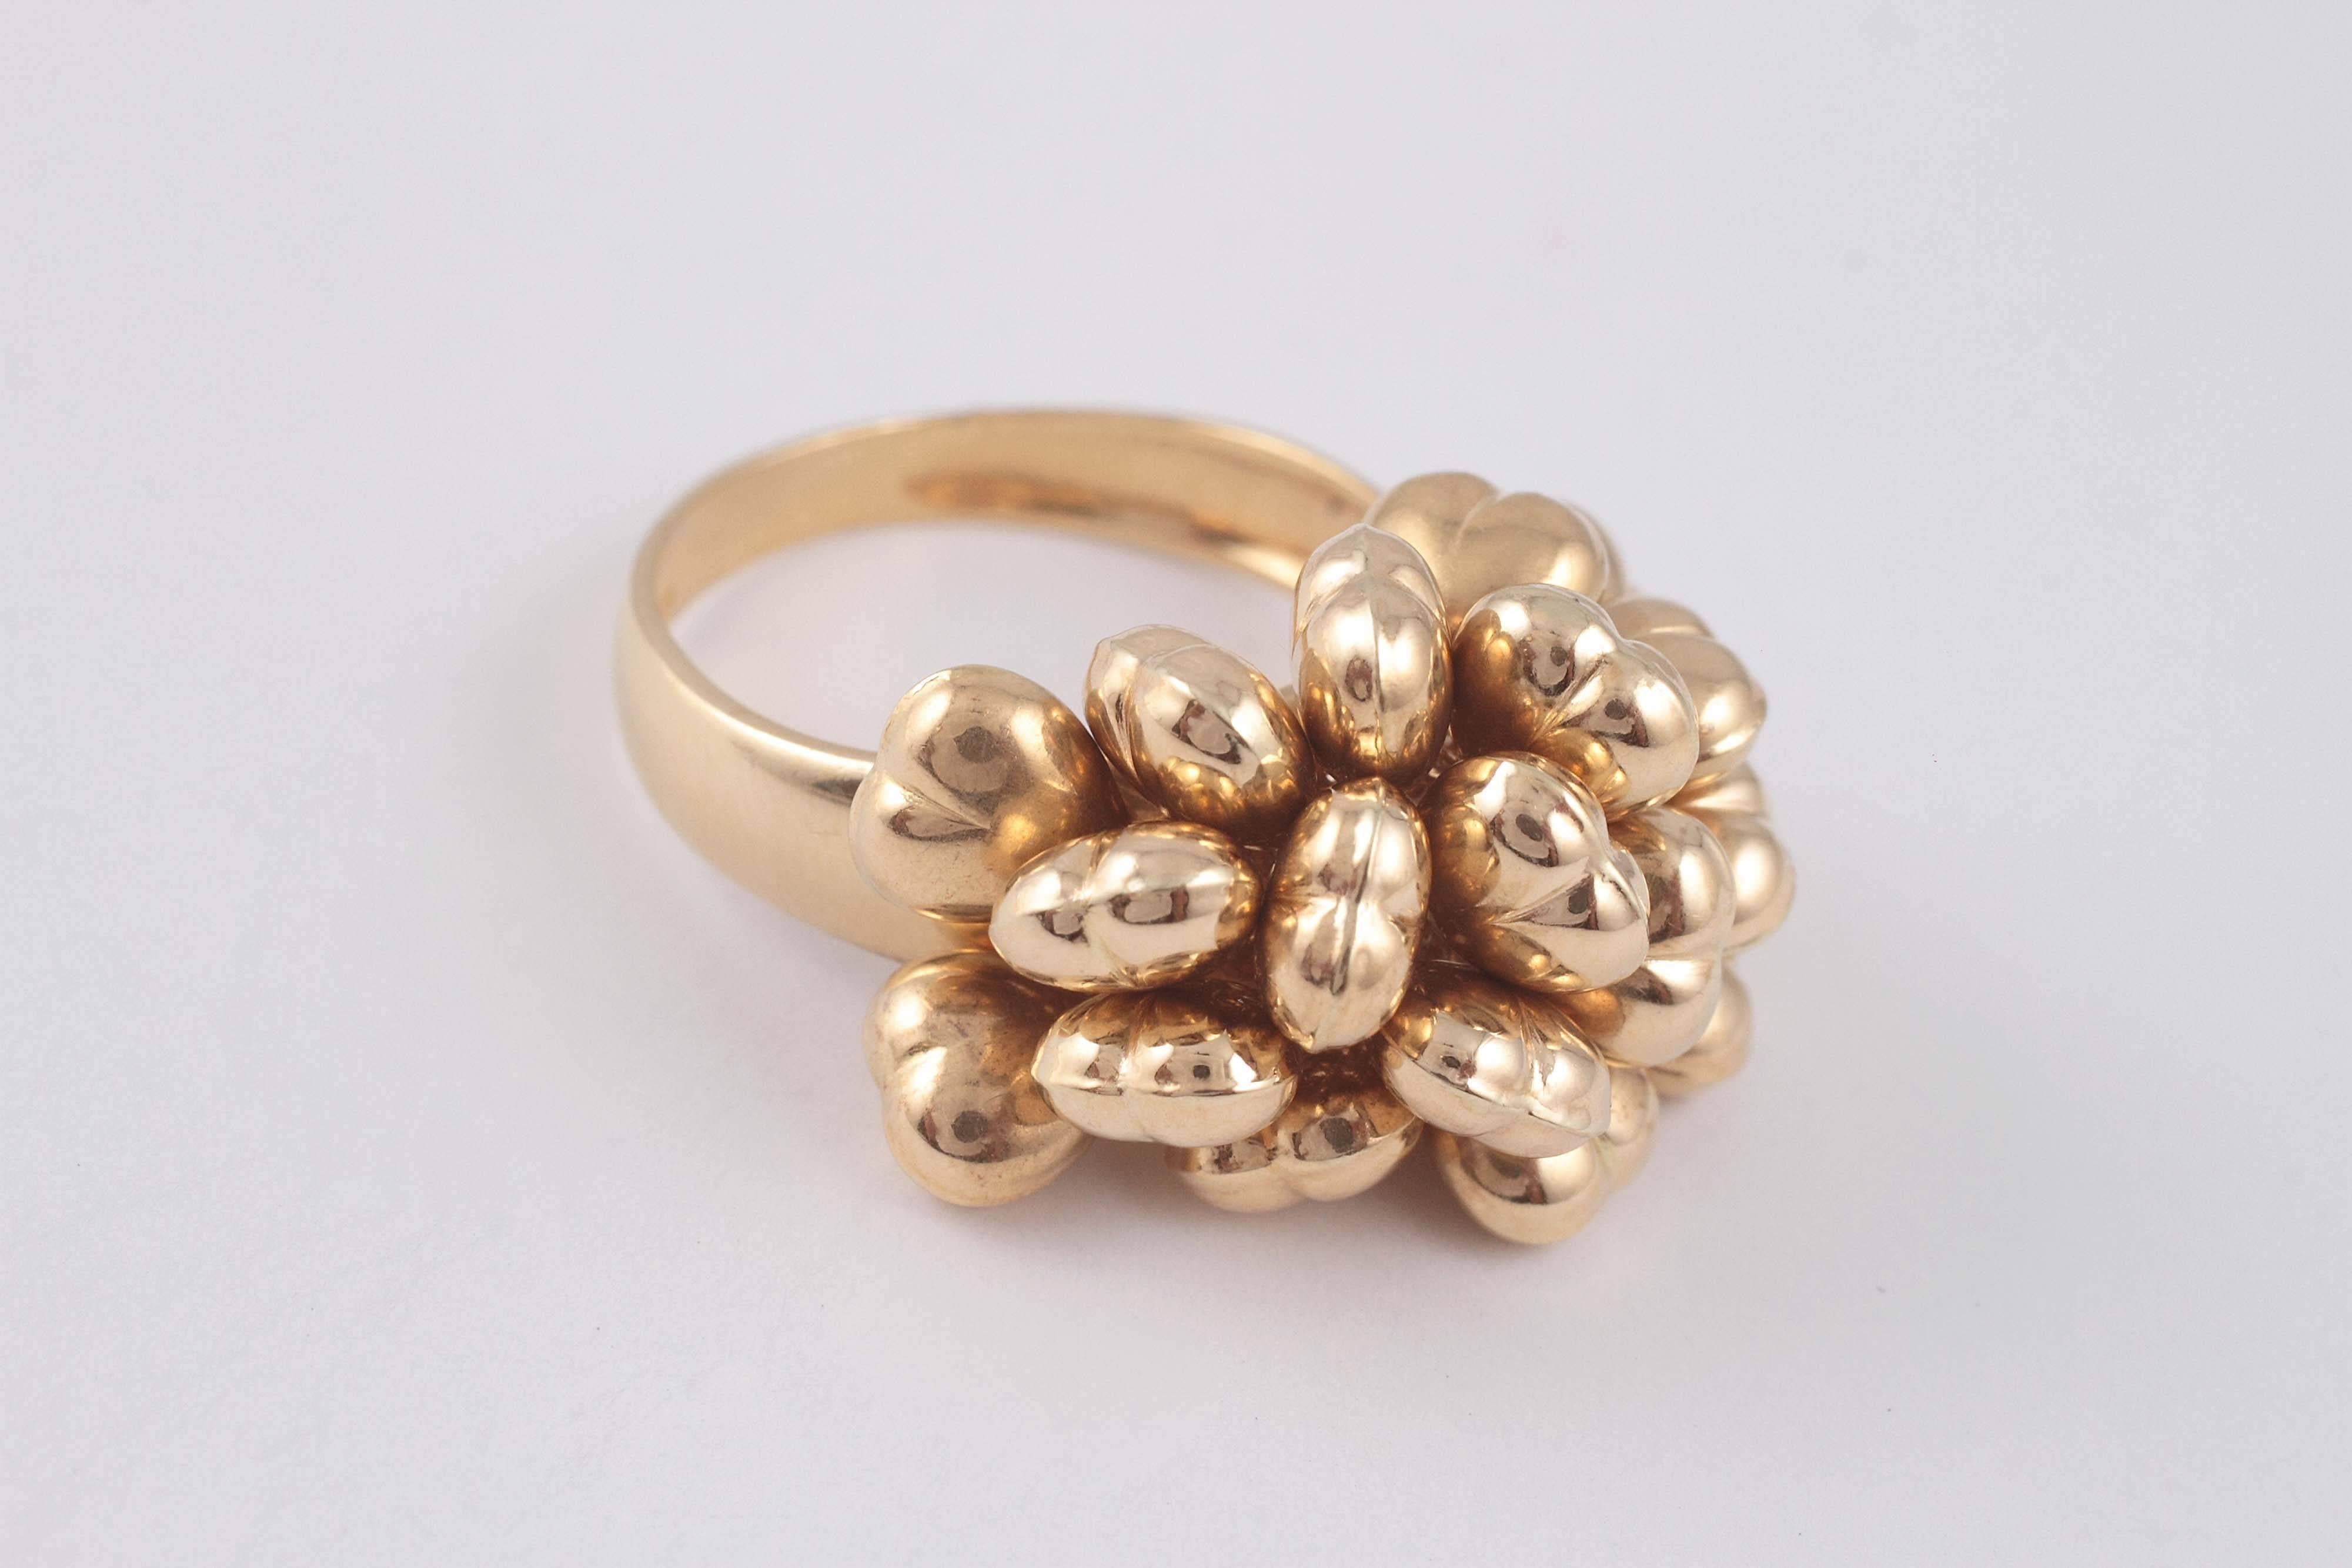 Fun and whimsical - this 18 karat, Italian ring has heart shapes that move with your hand!.  Size 8